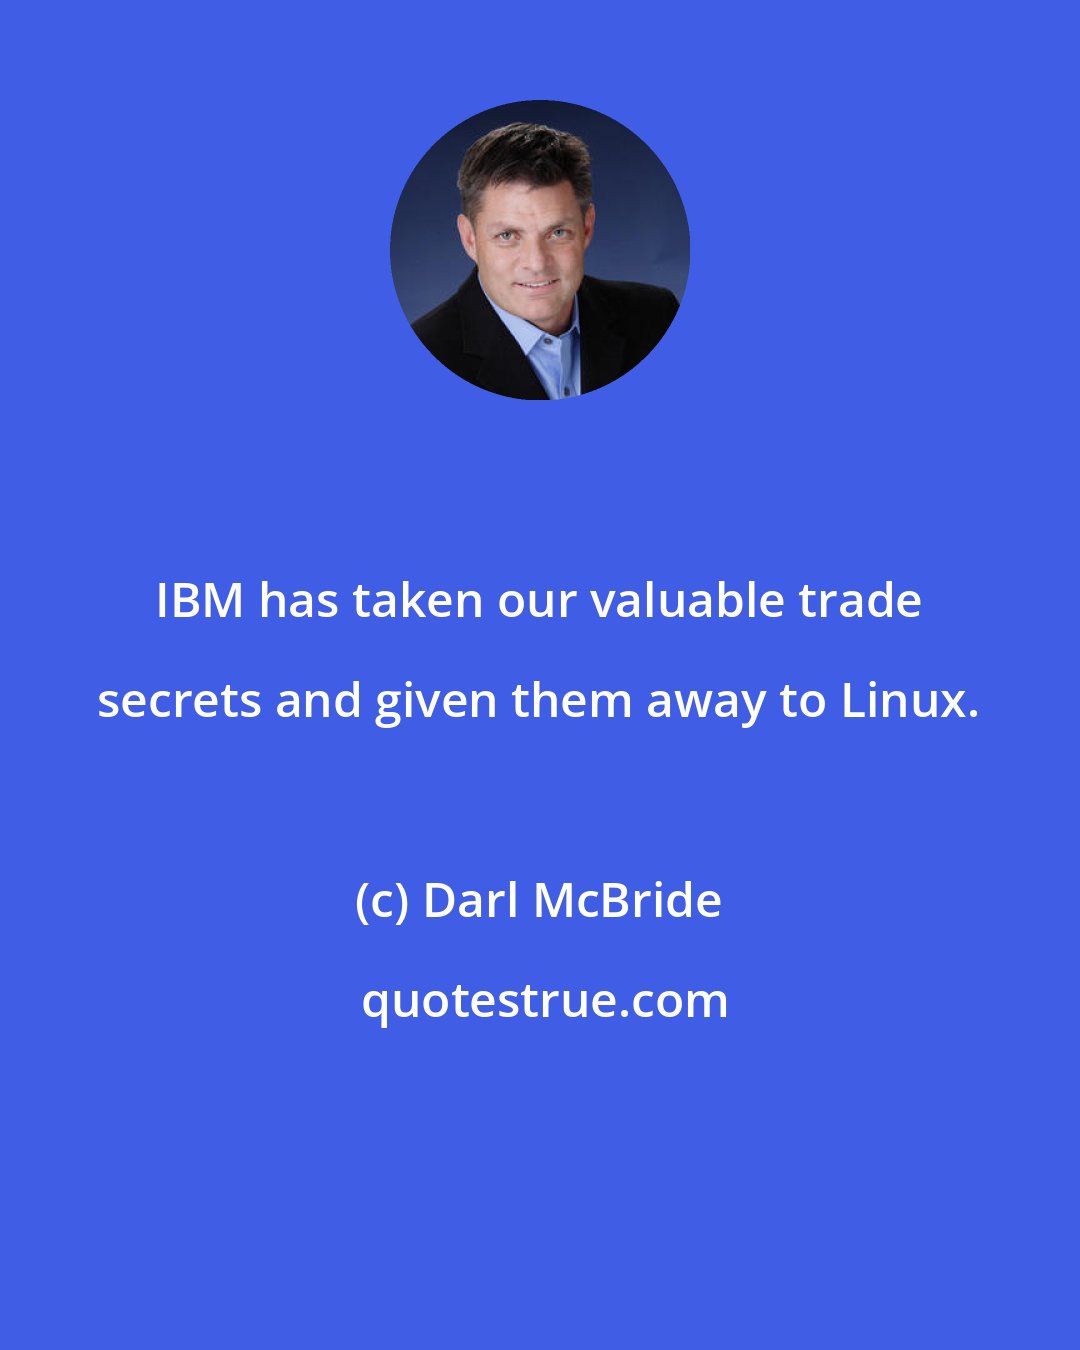 Darl McBride: IBM has taken our valuable trade secrets and given them away to Linux.